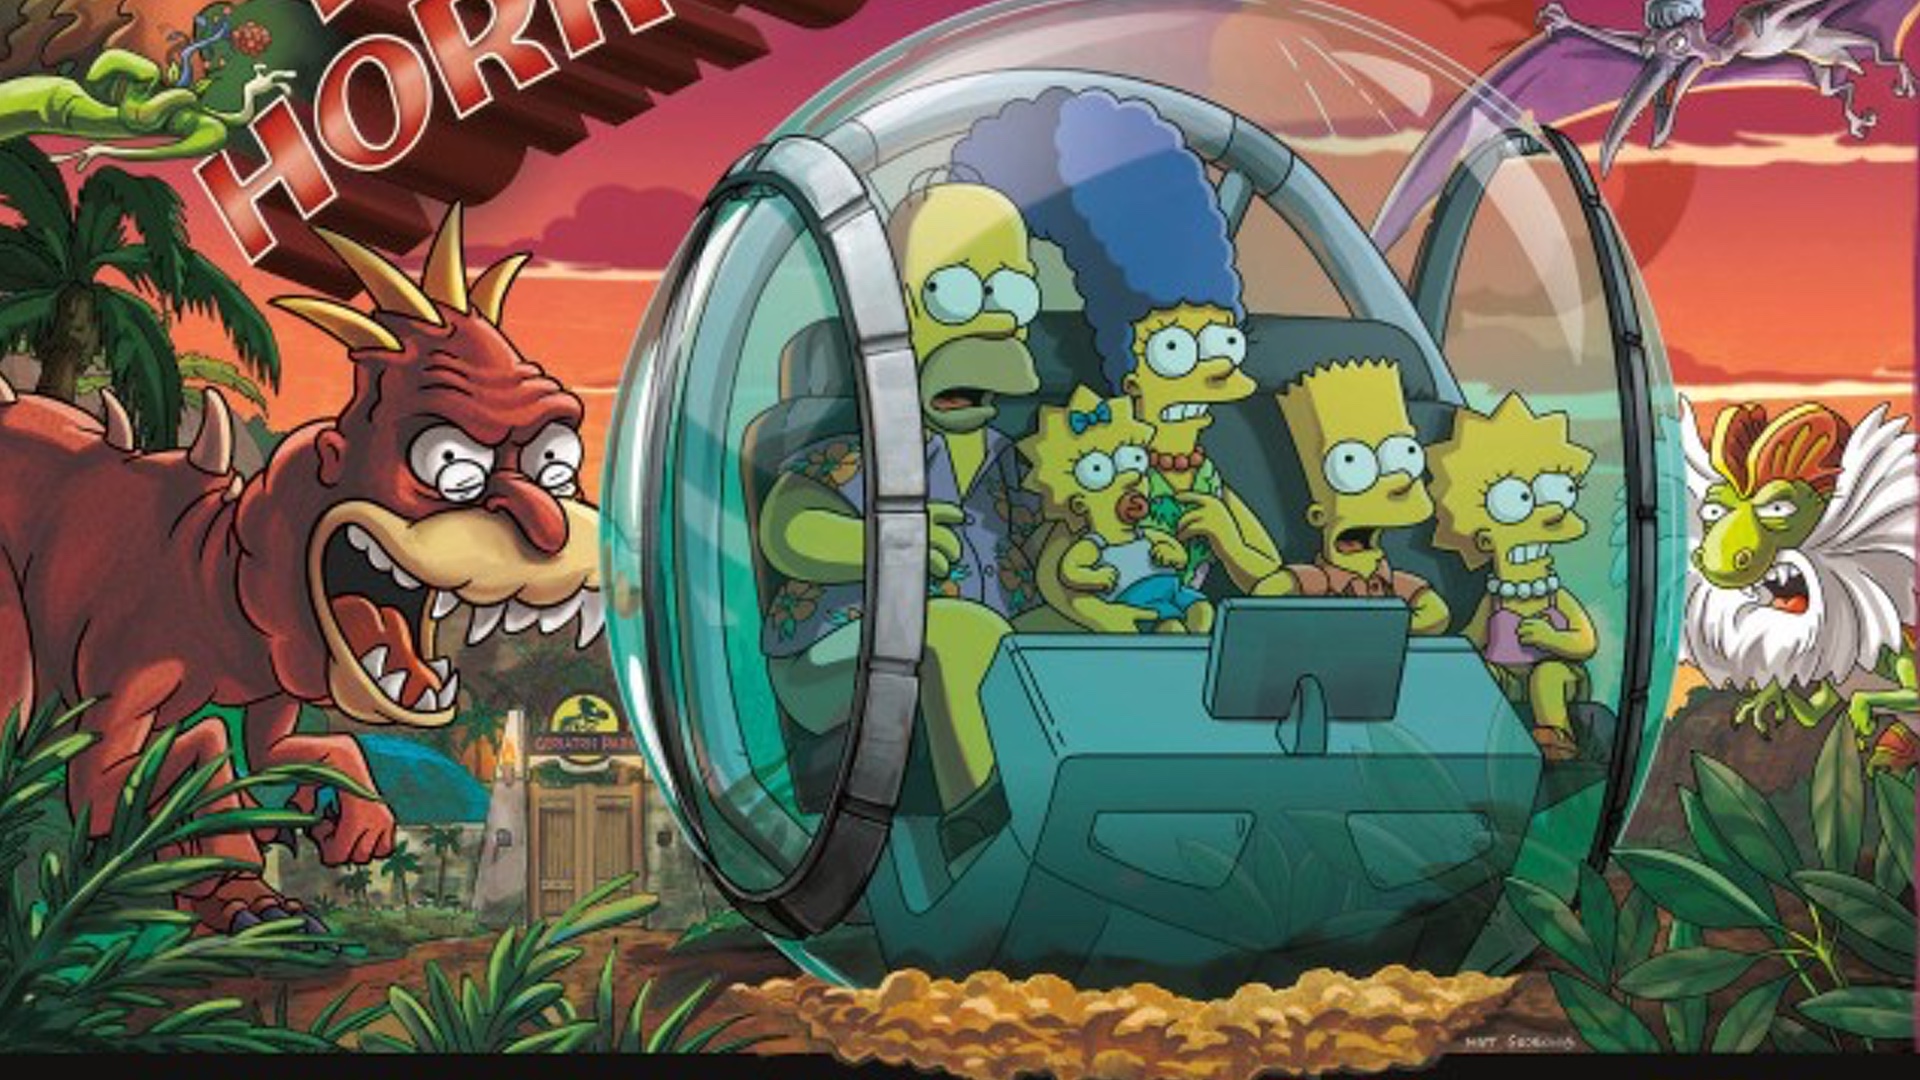 The Poster For THE SIMPSONS Upcoming Treehouse Of Horror Has Been Released.